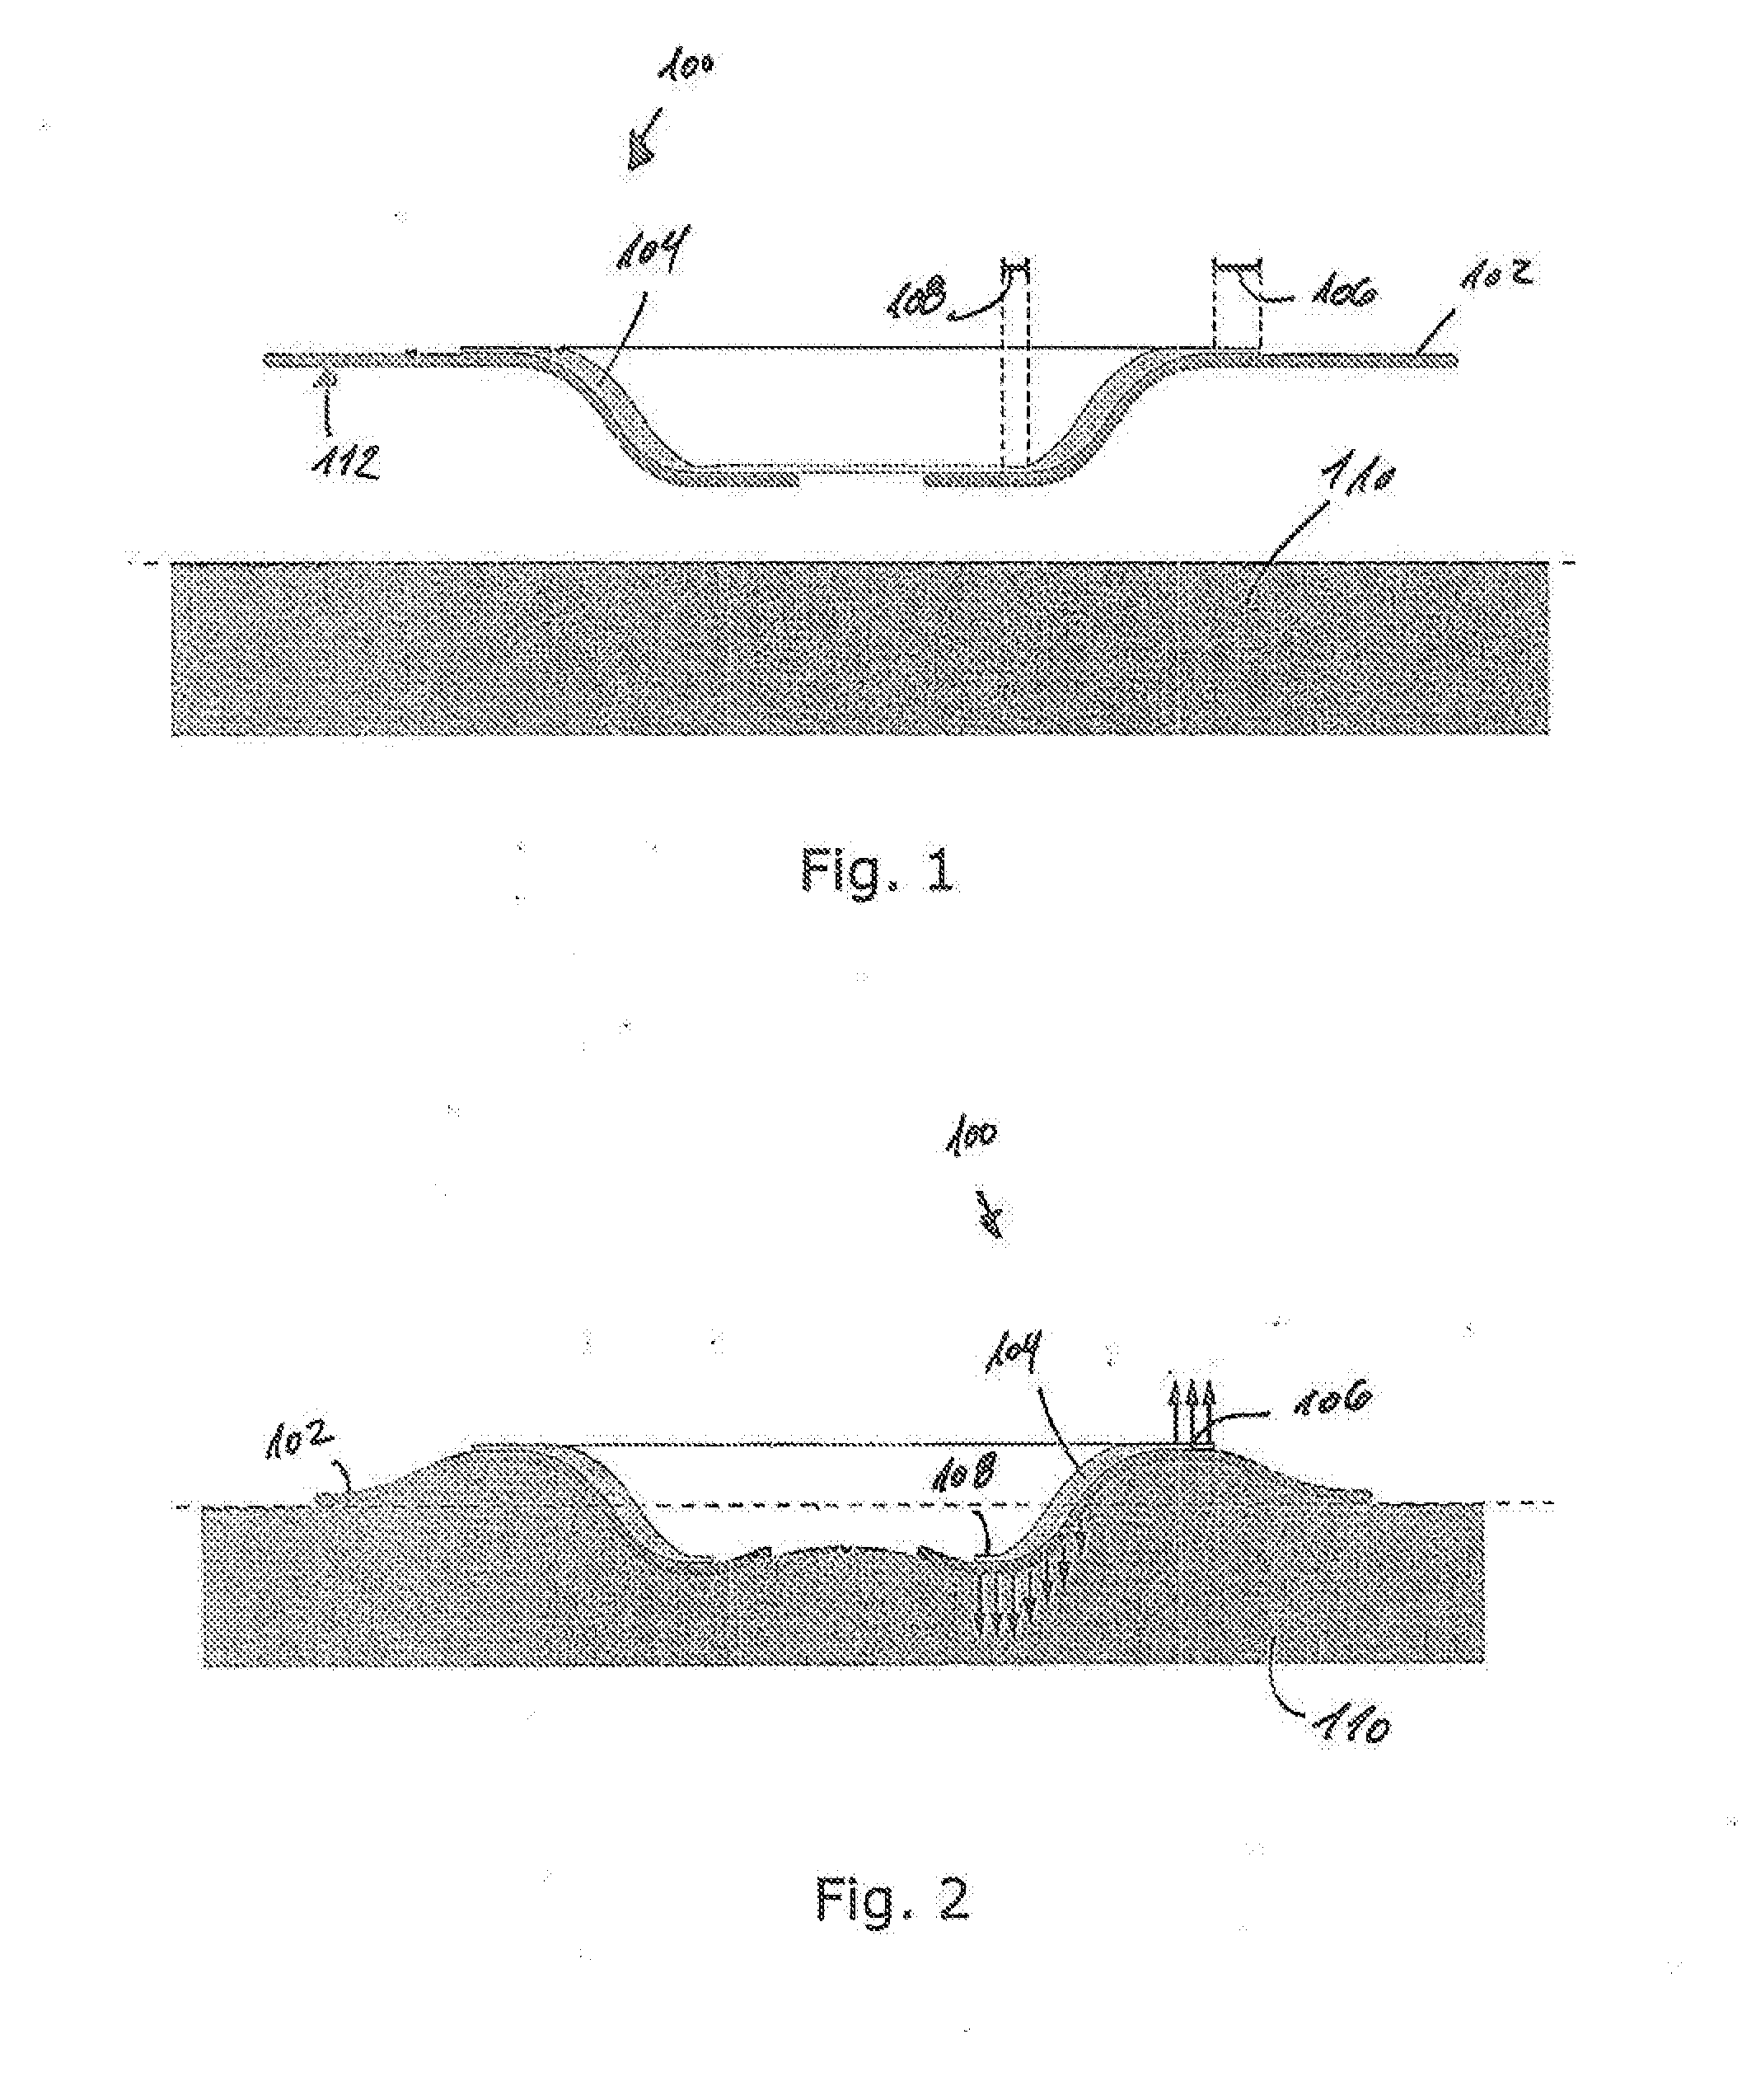 Convex supporting device